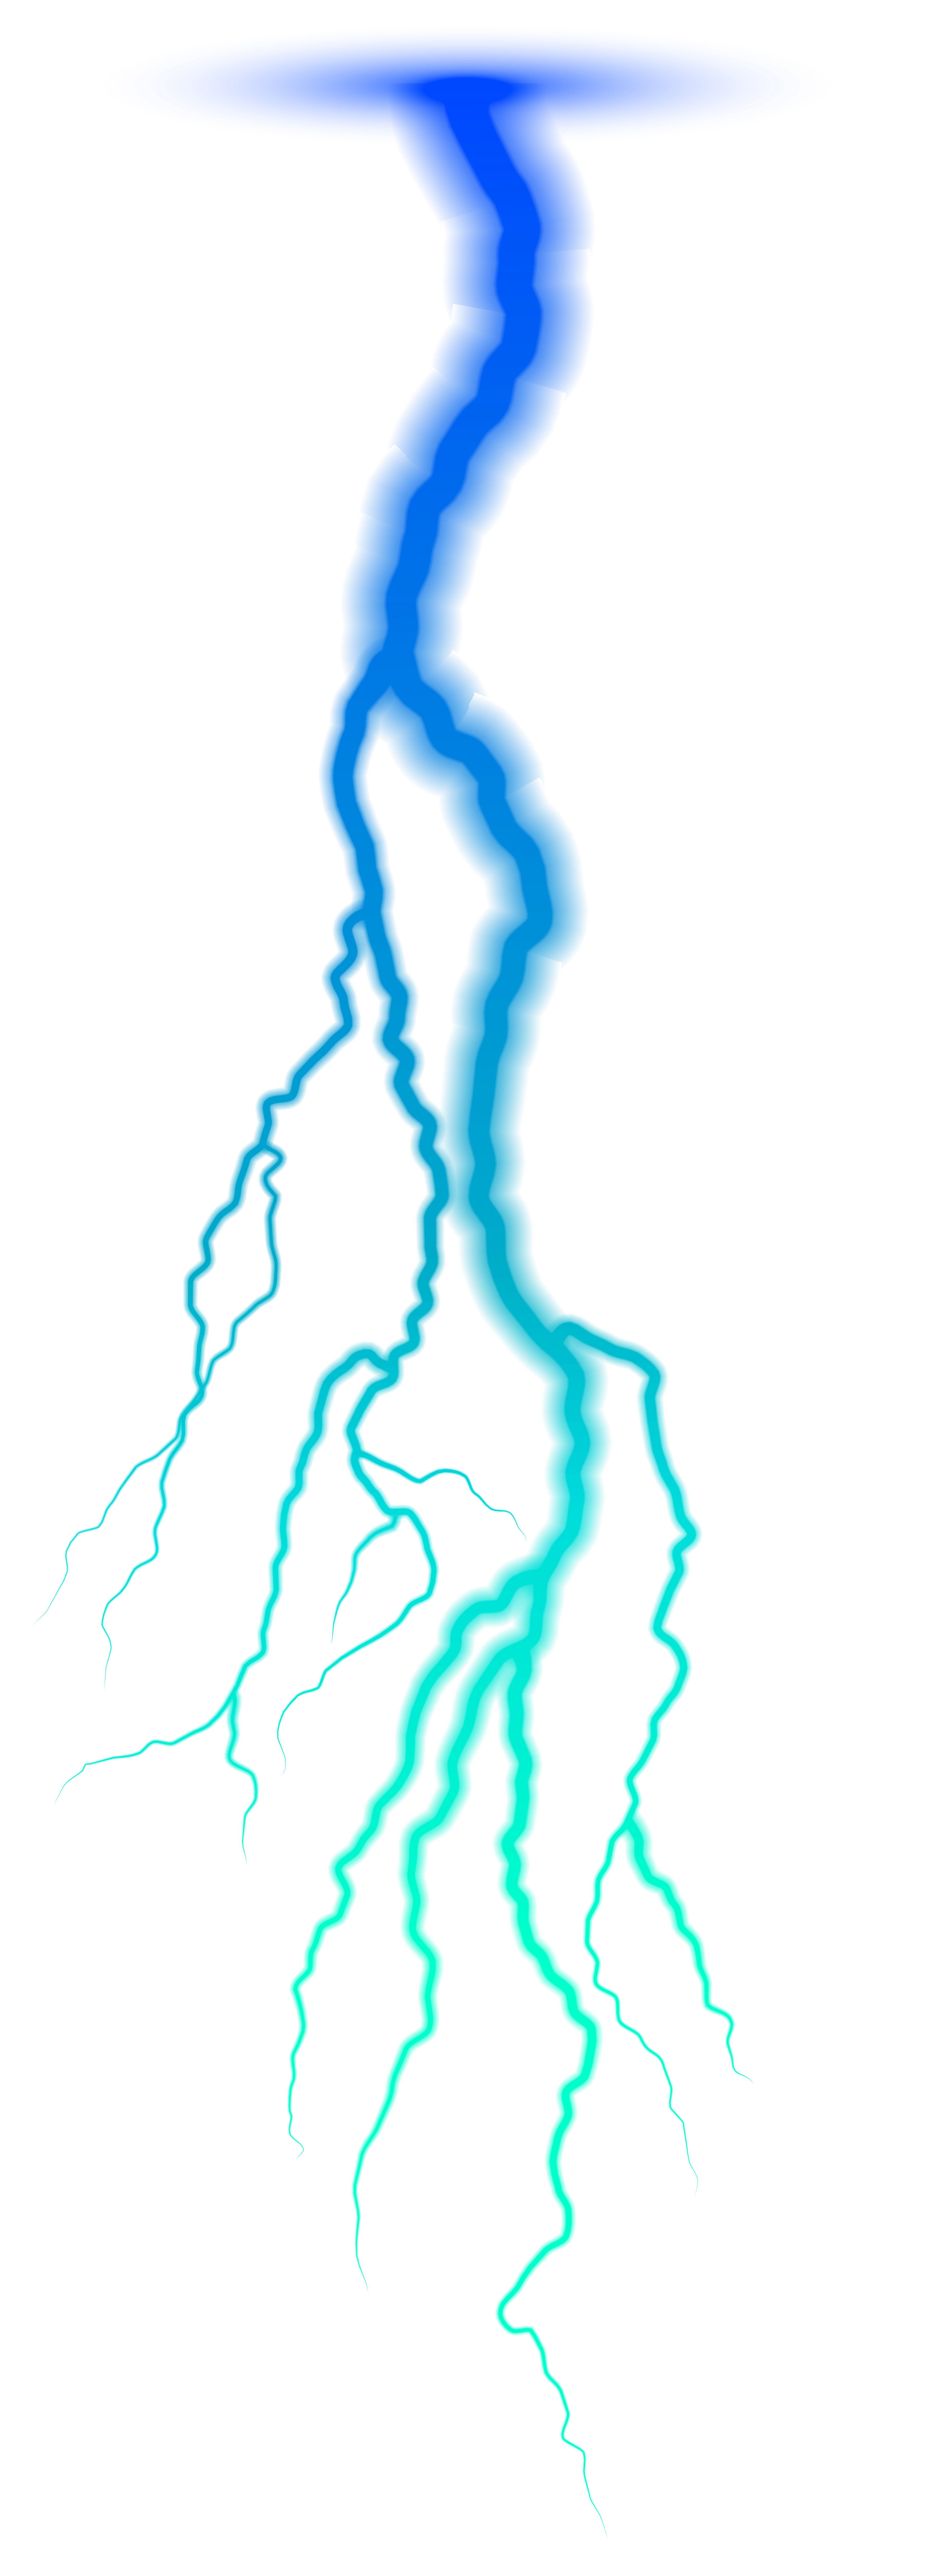 Free Thunder Transparent, Download Free Clip Art, Free Clip